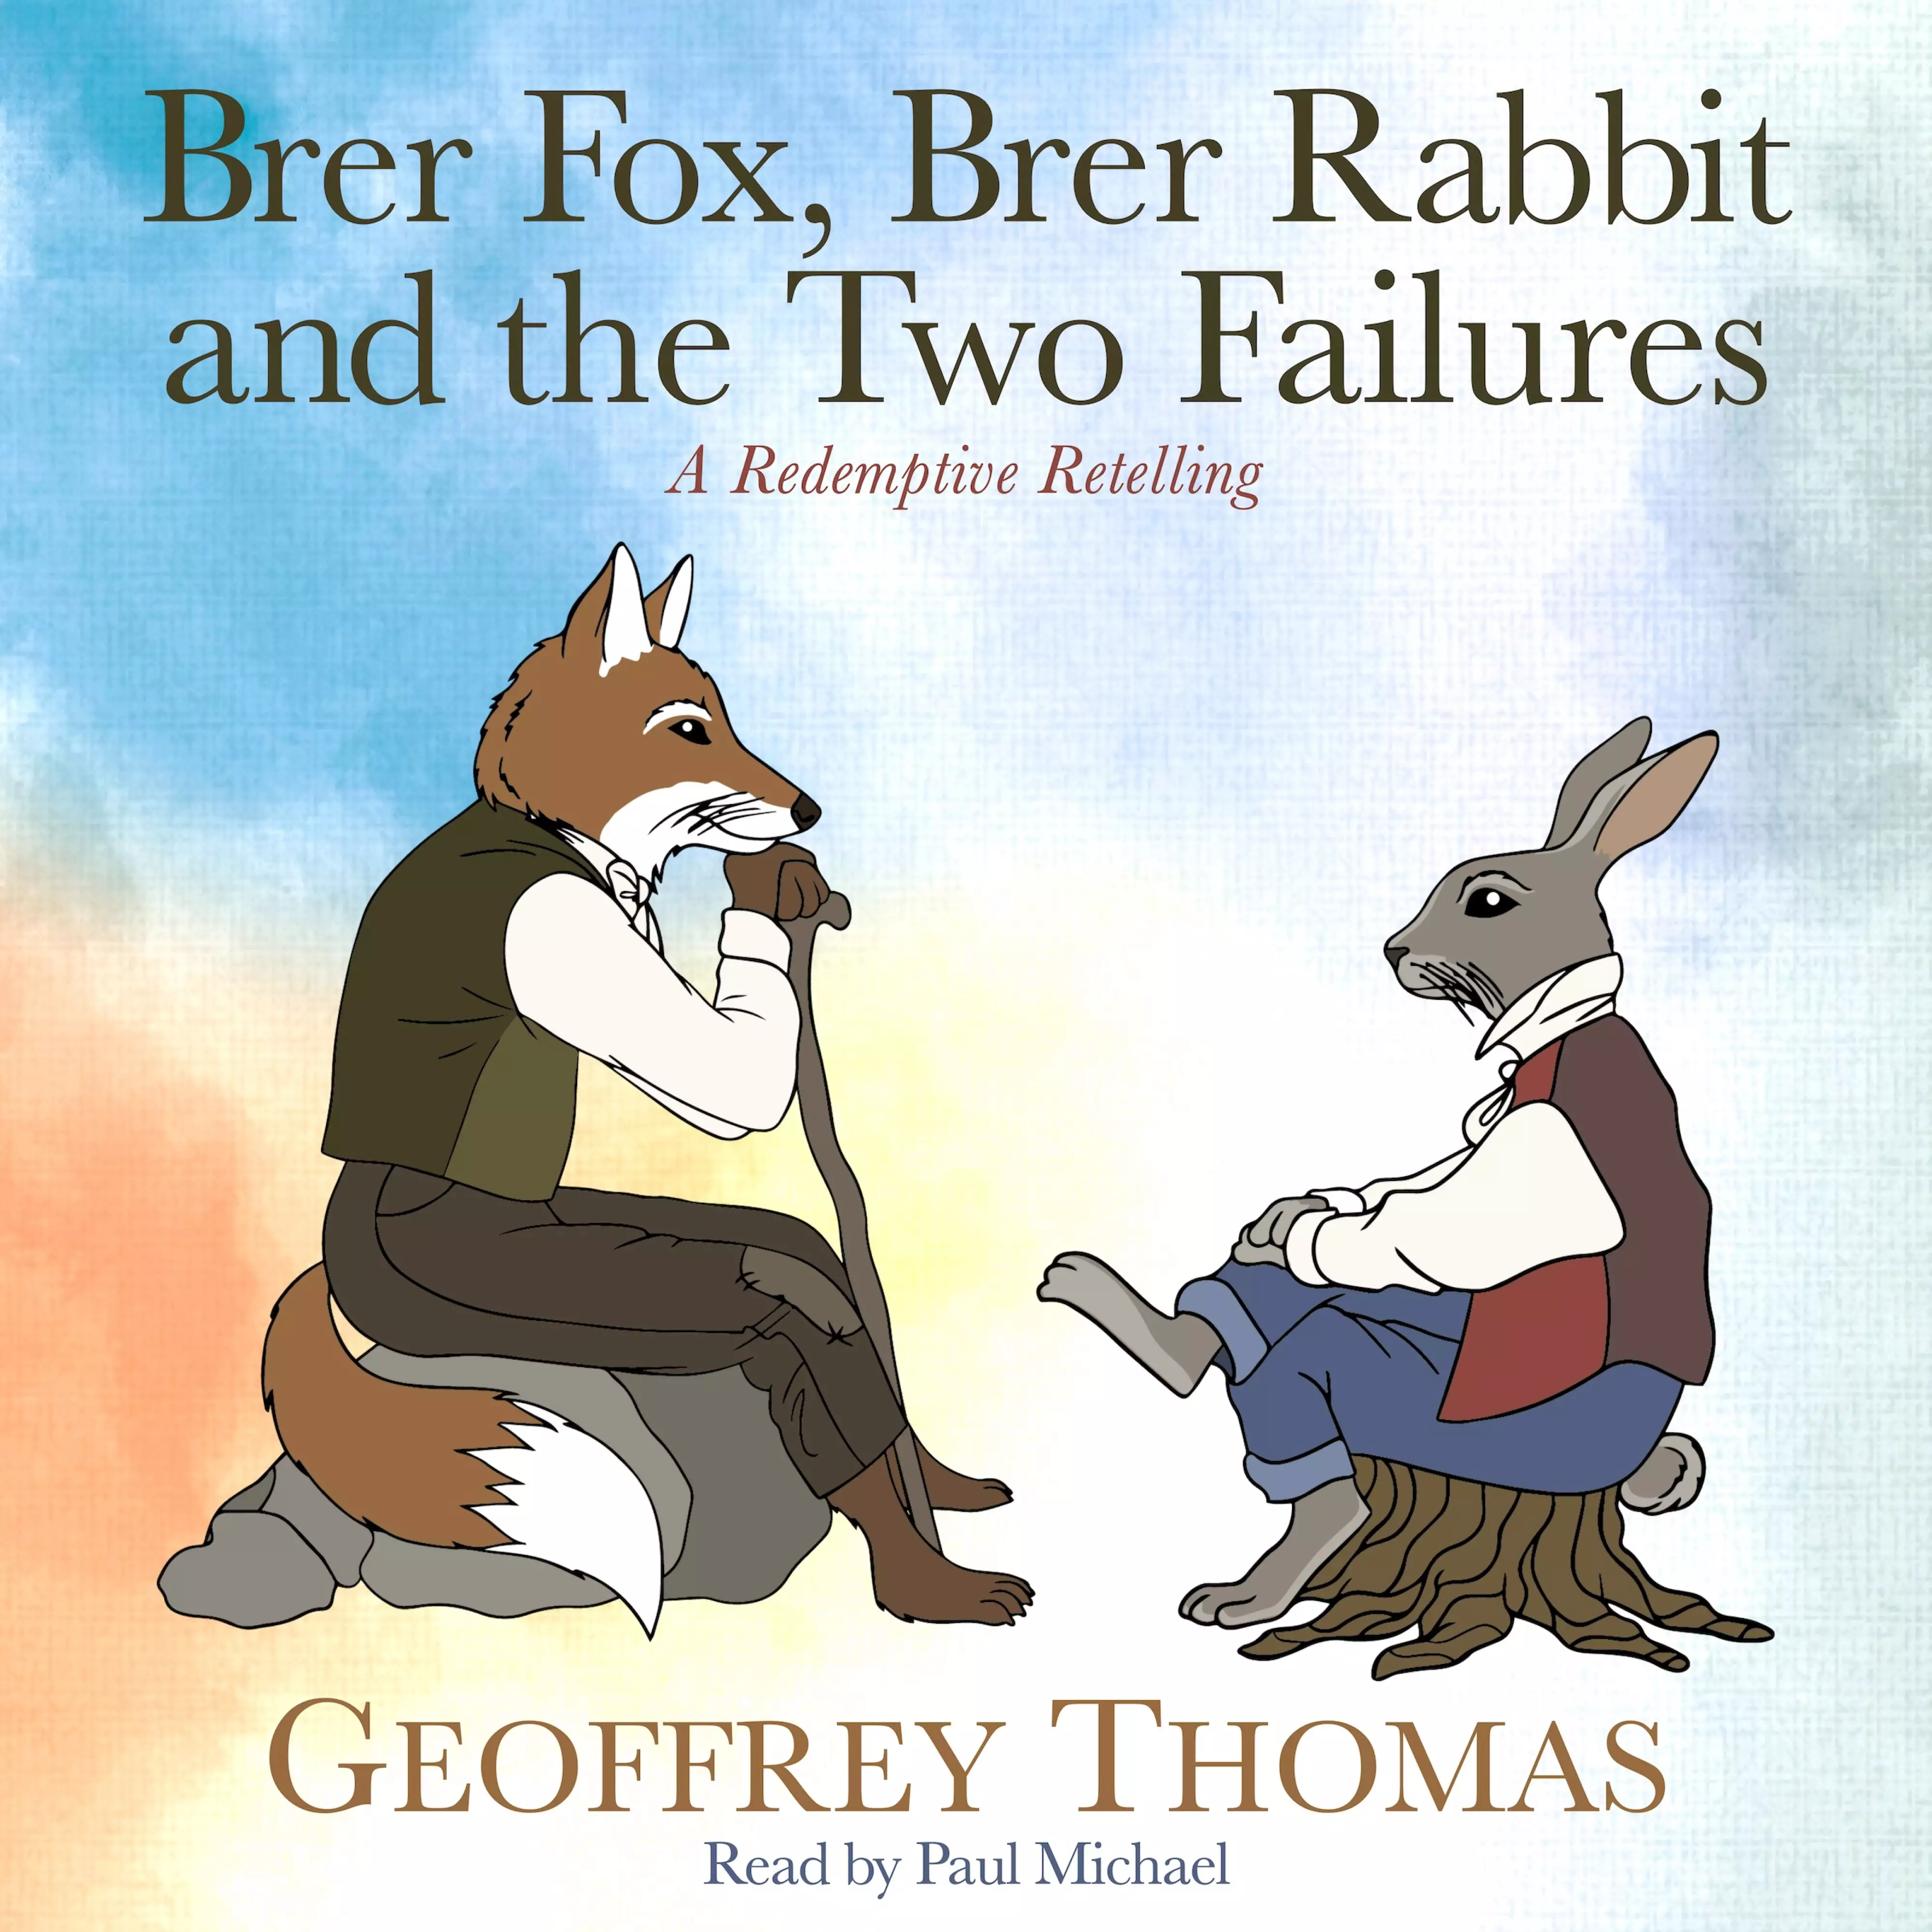 Brer Fox, Brer Rabbit and the Two Failures